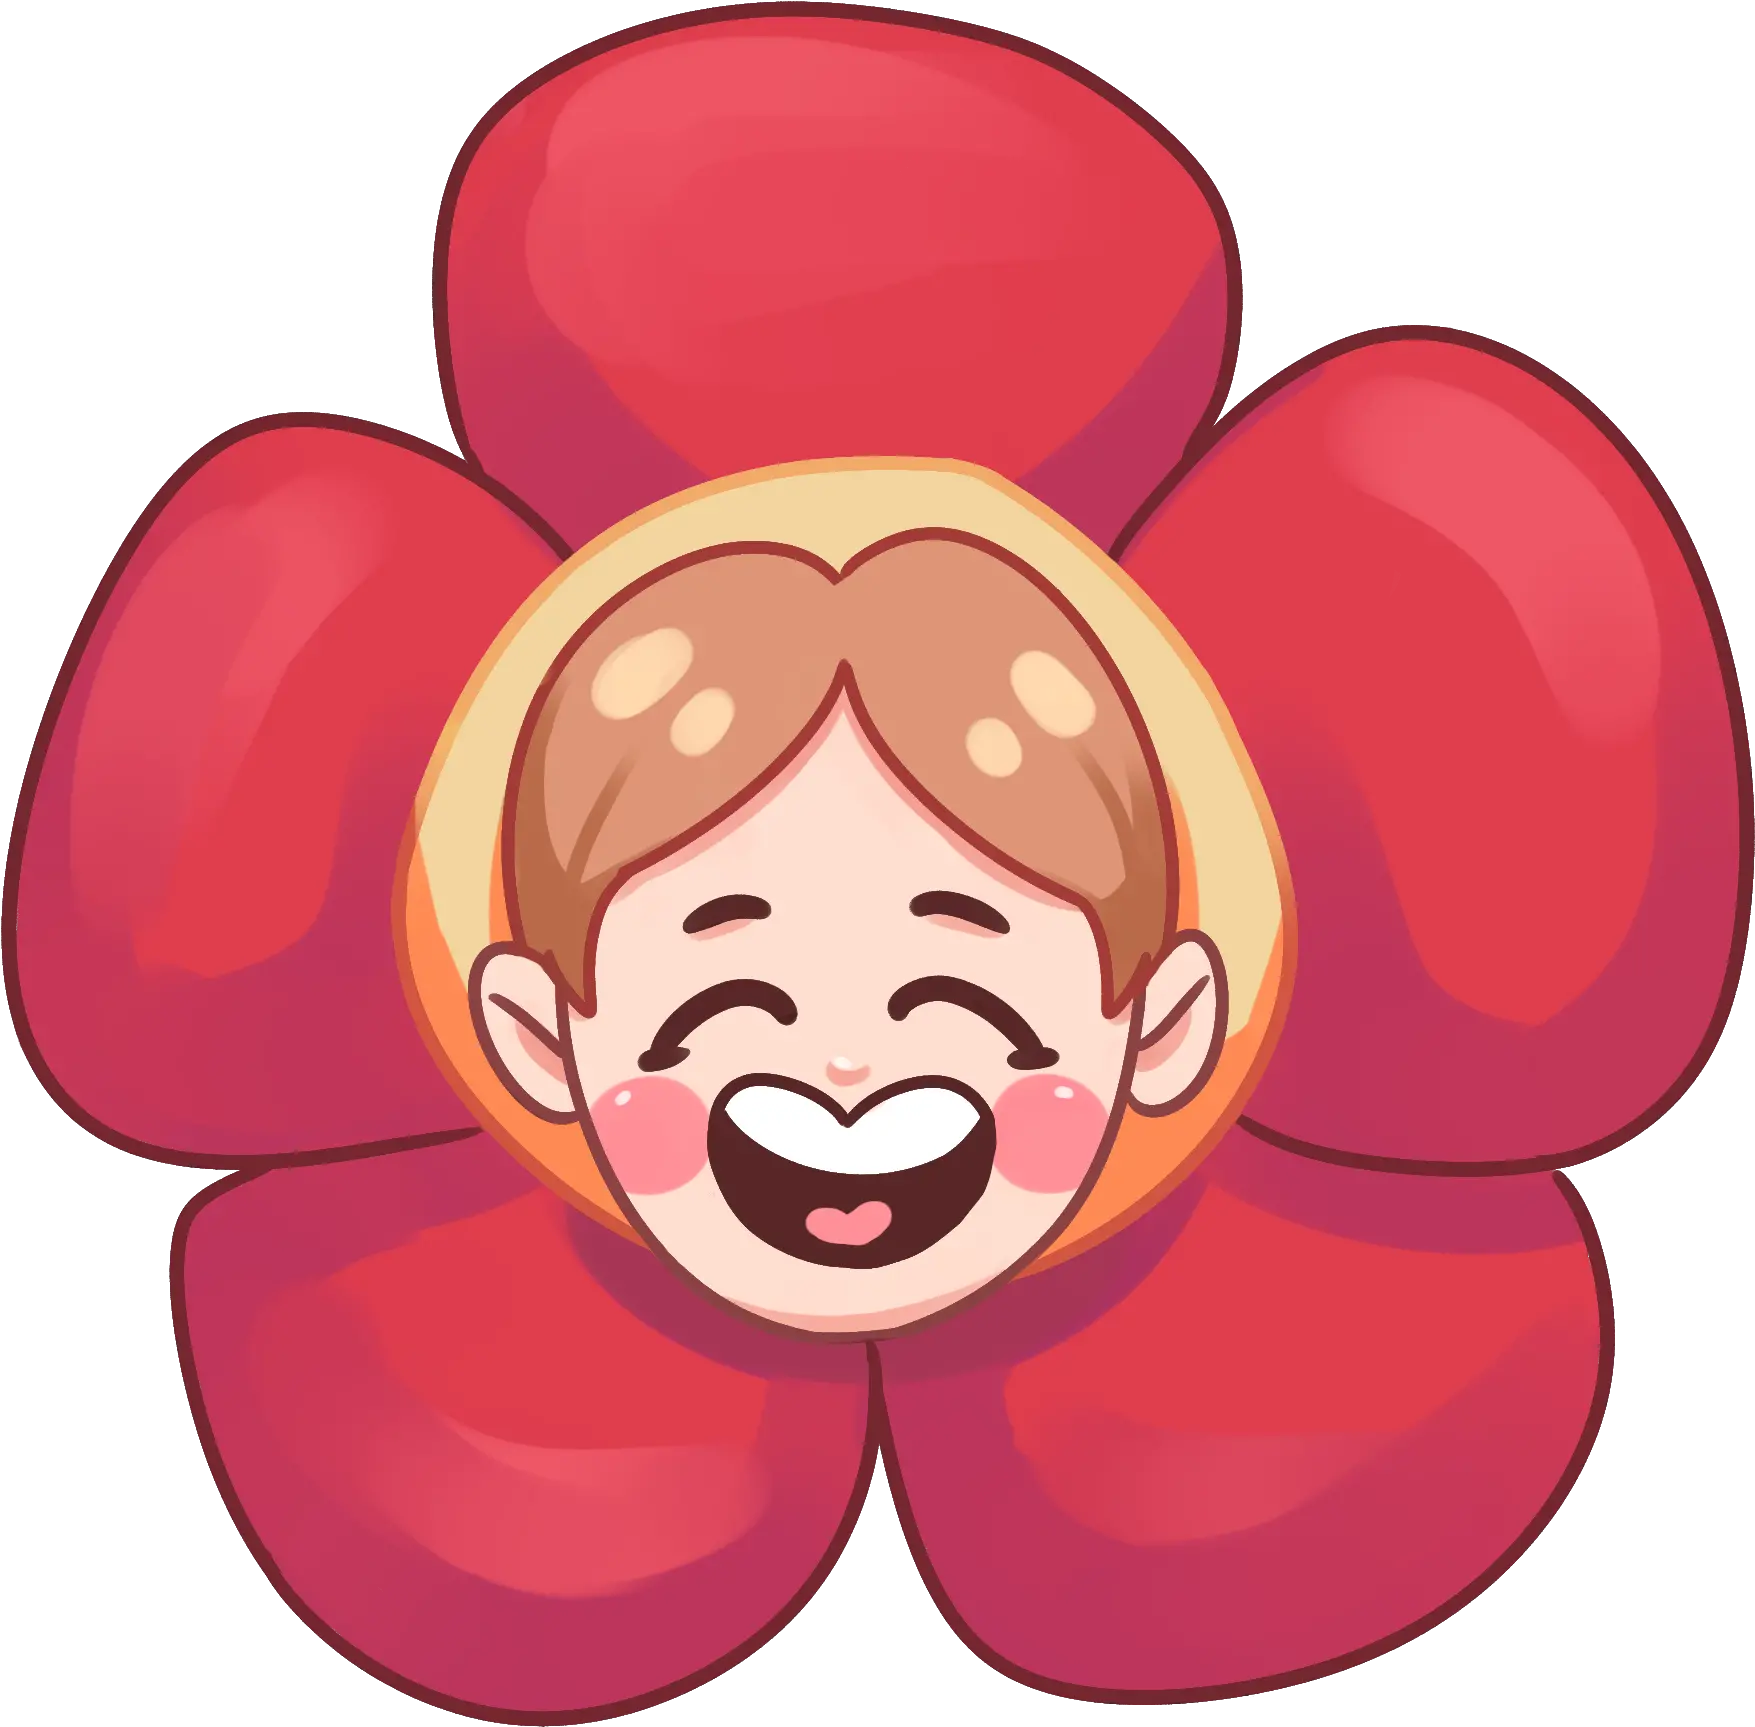 Flower Jhope Cartoon Clipart Full Size Clipart 3676180 Jhope Sticker Png J Hope Png